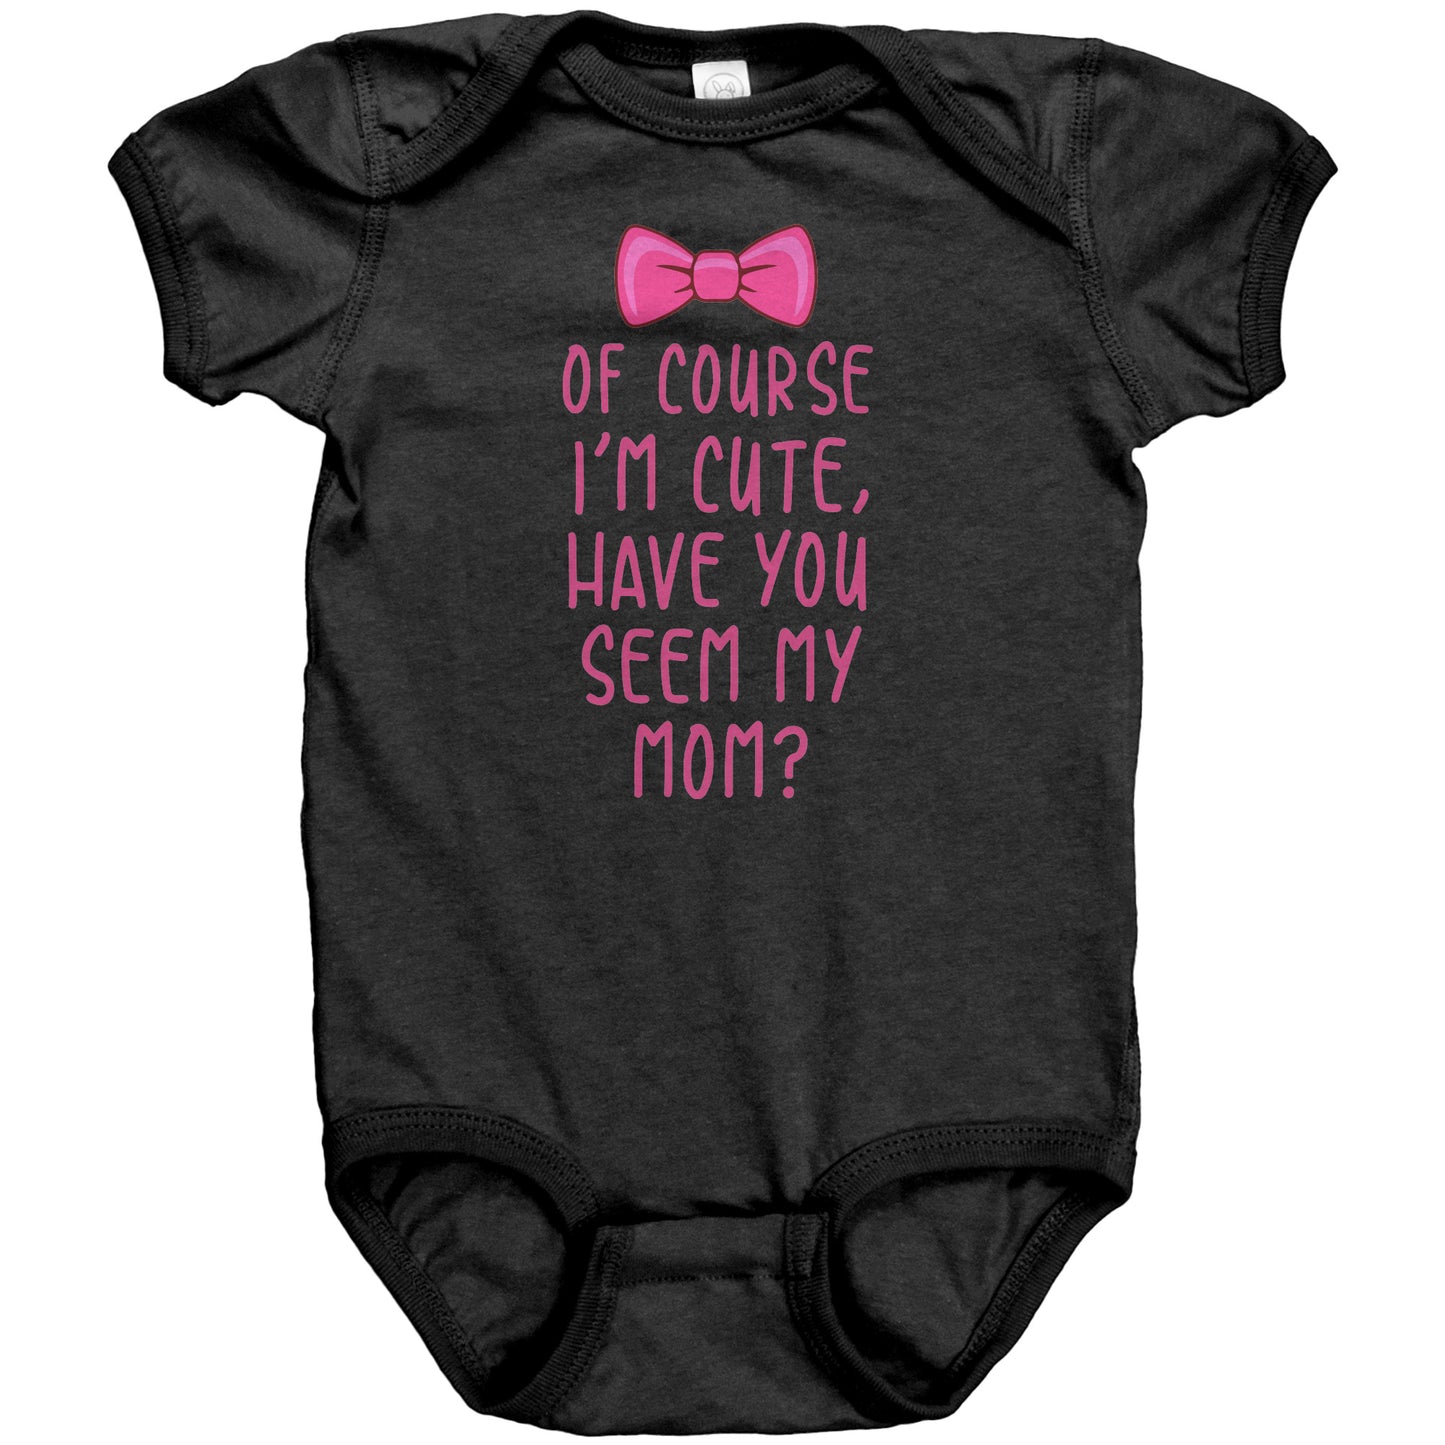 Of course I'm cute - Infant Bodysuits